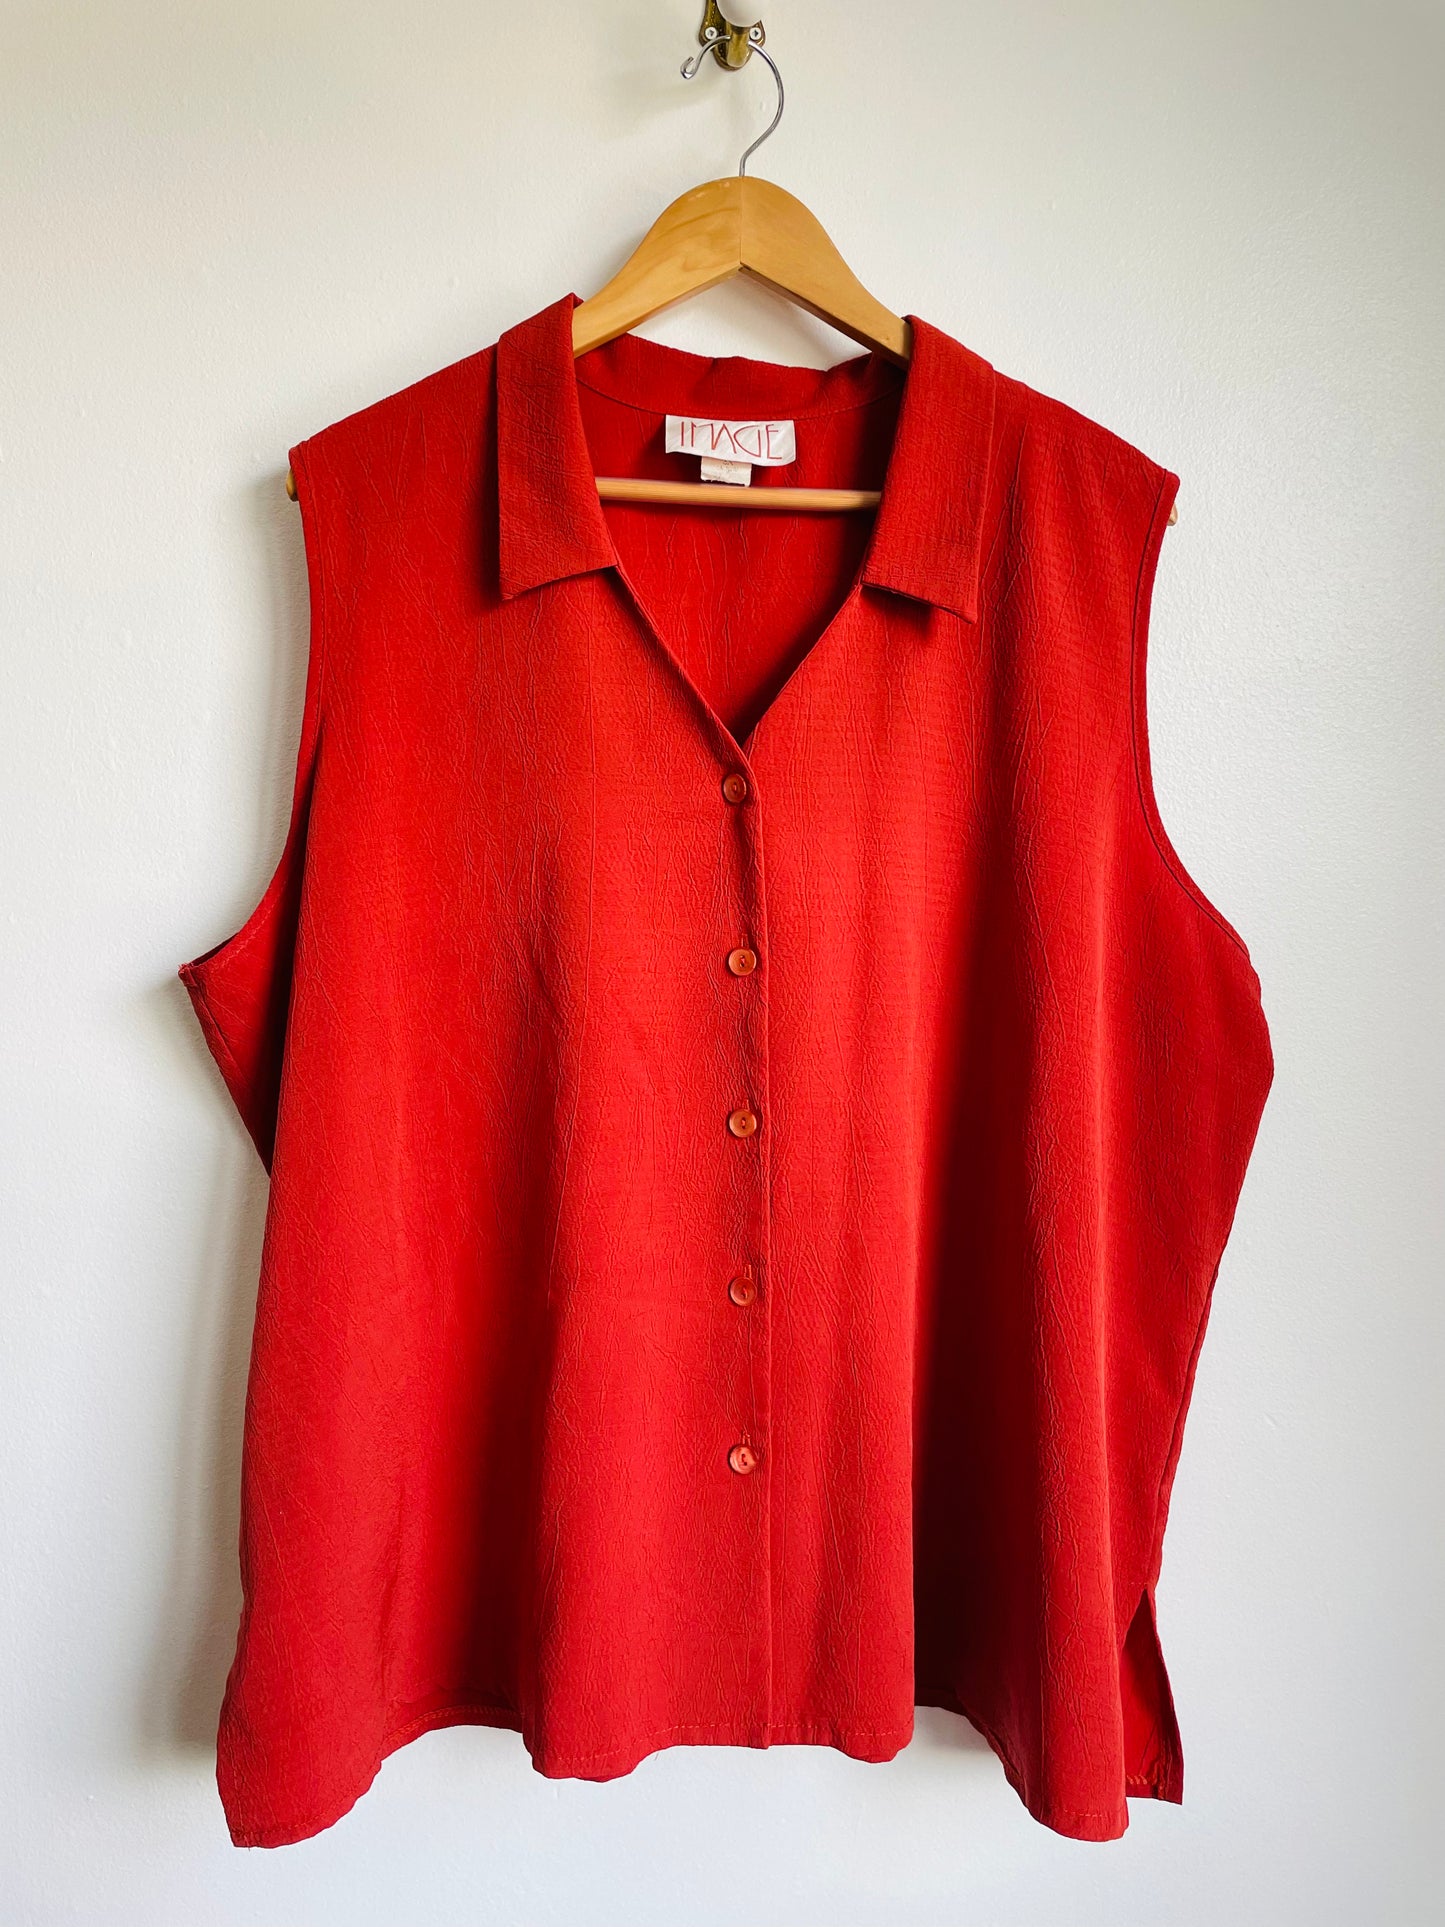 Vintage IMAGE Brand Rust Red Button Up Sleeveless Top with Dagger Collar - Size 3x